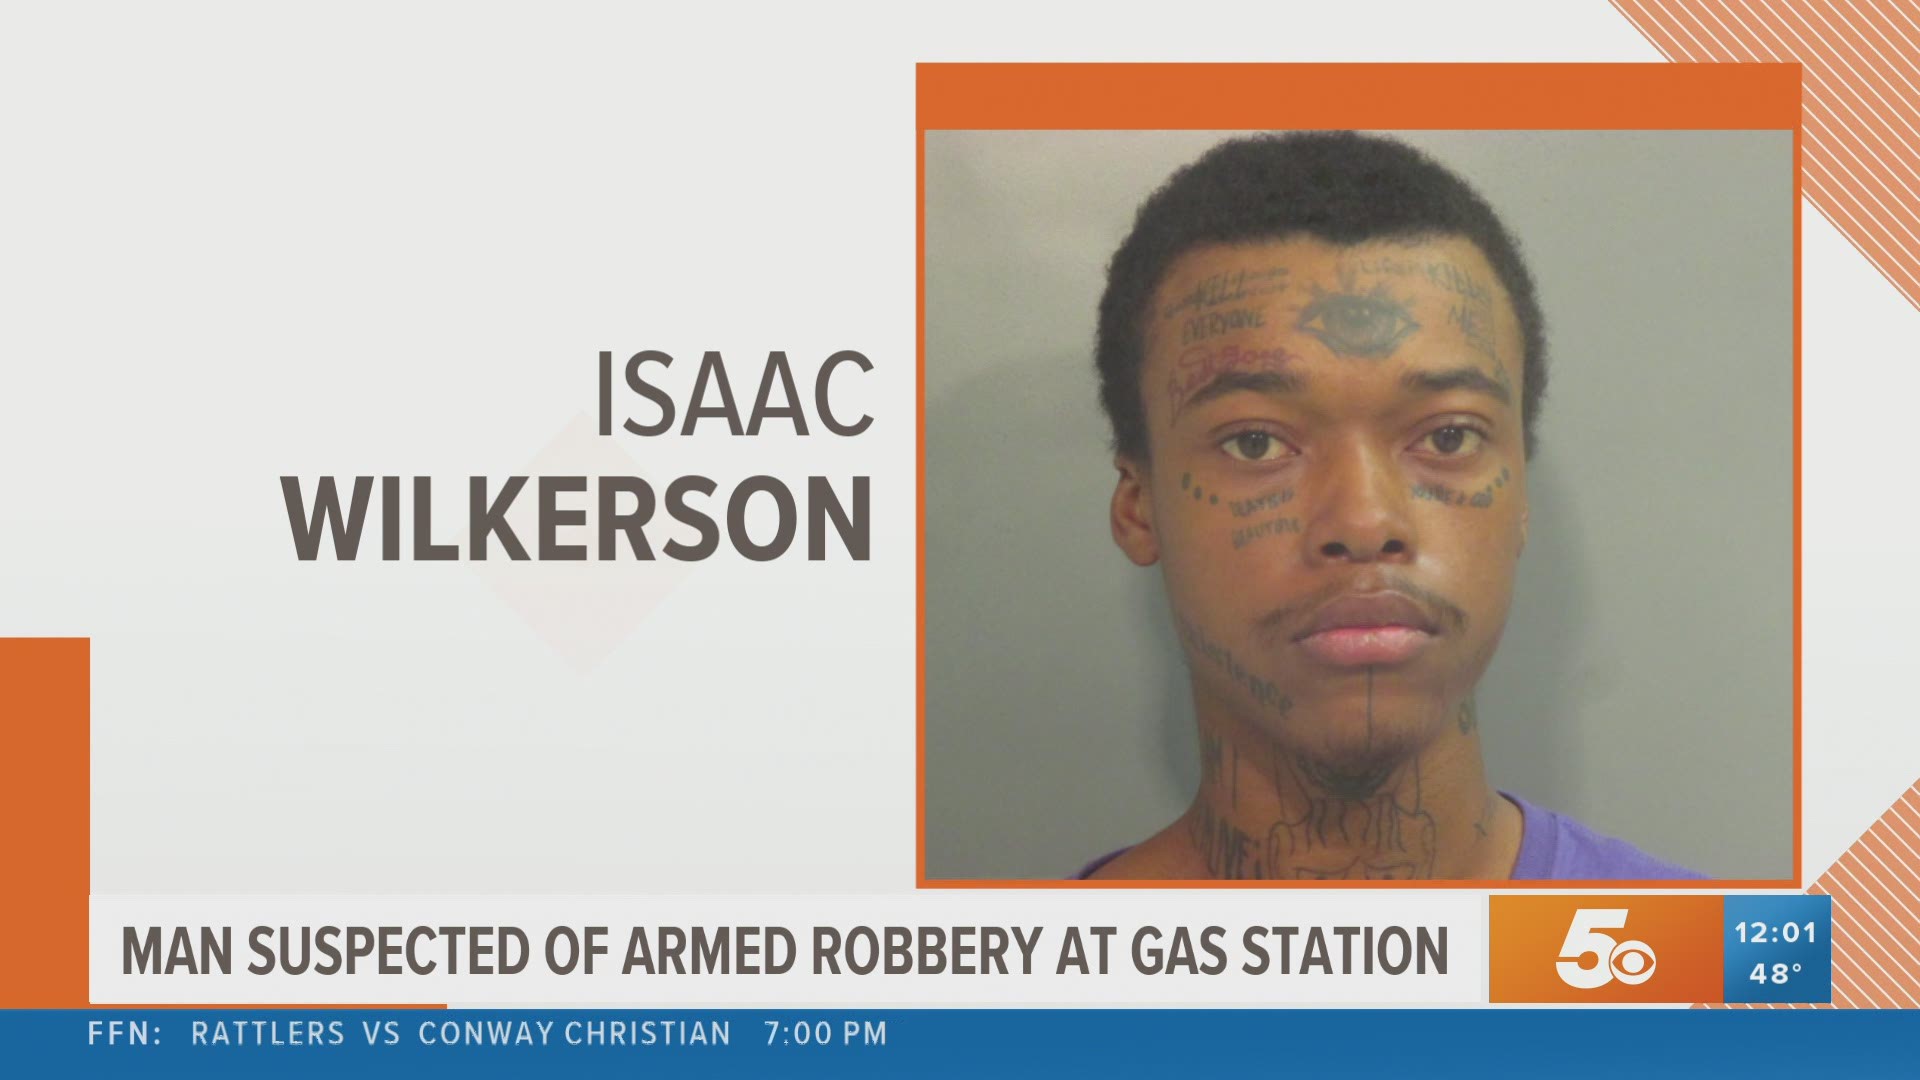 Man suspected of armed robbery at Springdale gas station